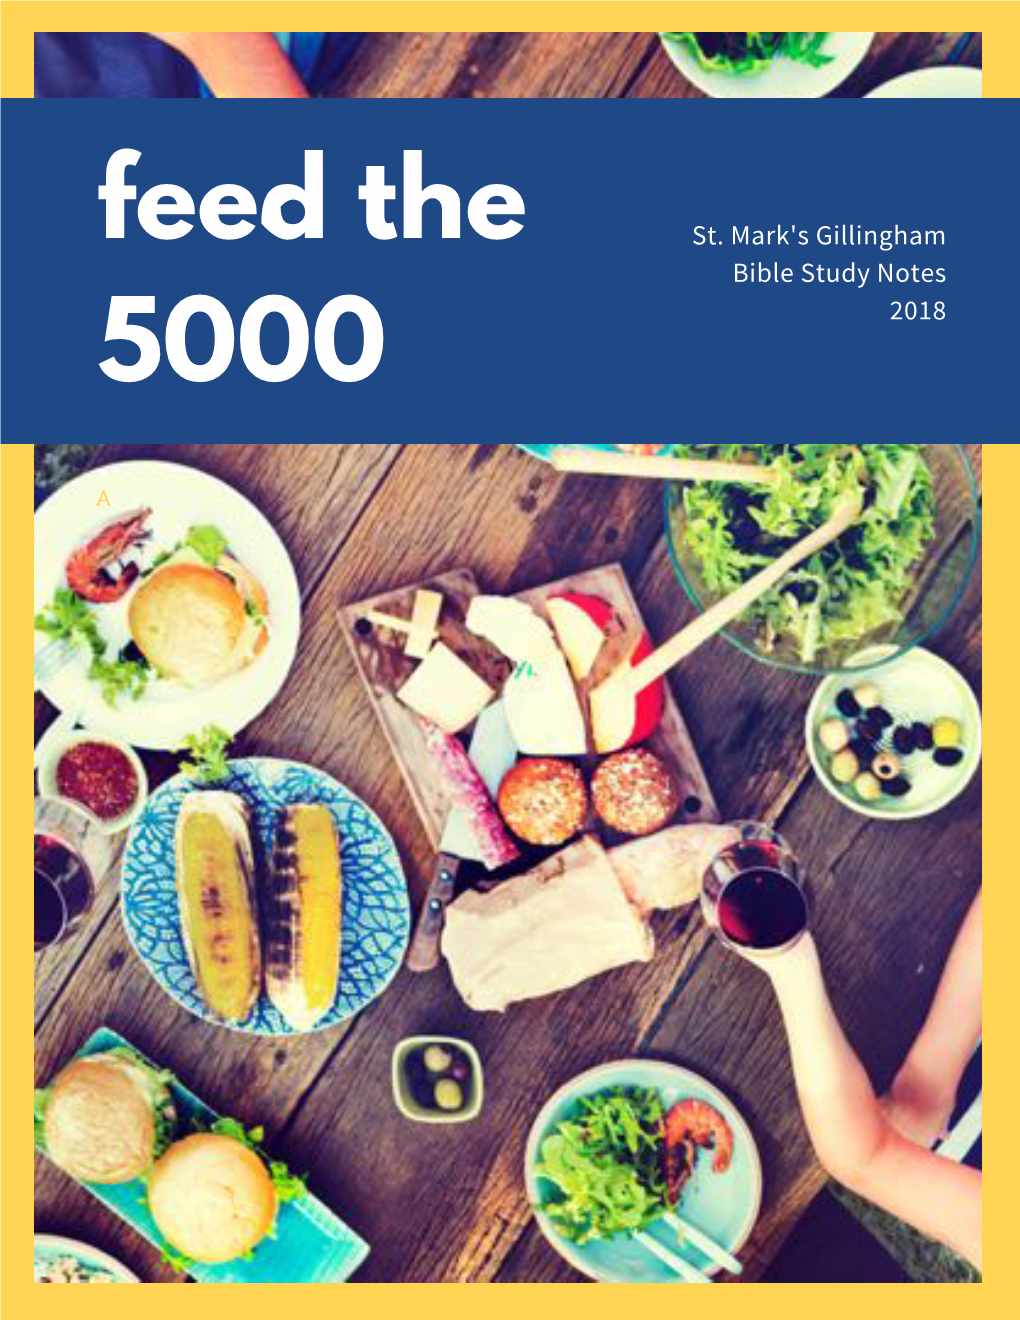 Feed the 5000 Contents